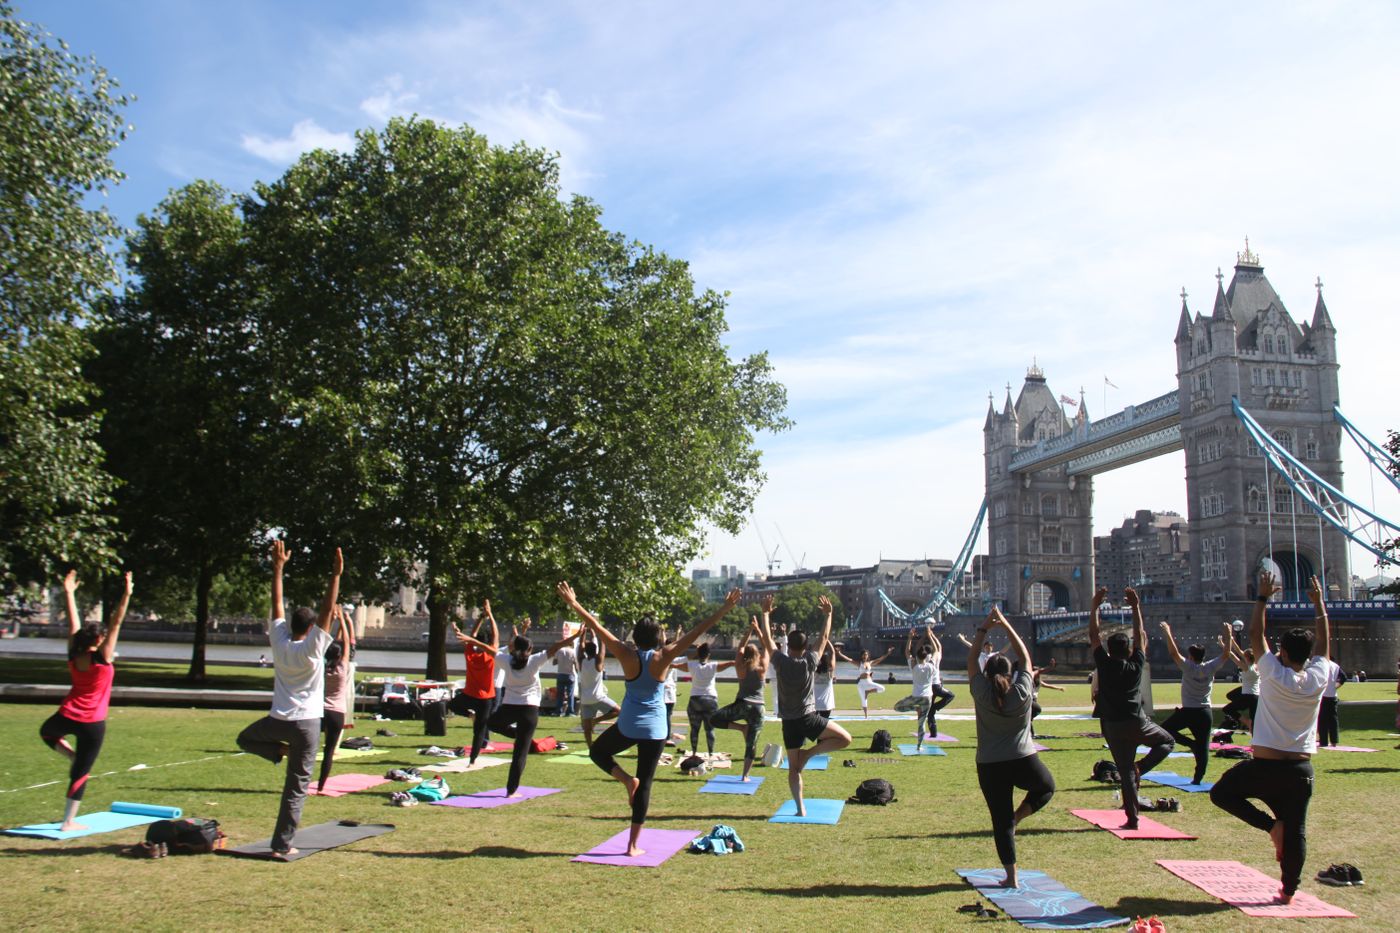 Yoga Flow - Outdoor Yoga at London Bridge Soham Yoga London & BUA FIT

📅 Every Thursday (next on 28th July 2022) ⏰ 12:30 BST 💰 £12 (BUA Unlimited - Get 14 days of unlimited group classes for ONLY £1 a day)

📍Terrace located at Saint Magnus House, 3 Lower Thames St, Bridge, London EC3R 6HE (51°30'31.3"N 0°05'09.3"W). Recharge Yoga 🤸🏻‍♀‍ Mindfulness to the max. This is your time to let it go. Mindfulness to the max. This is your time to let it go.

Book Now: https://bua.fit/class/LwxtSvDCmQrV